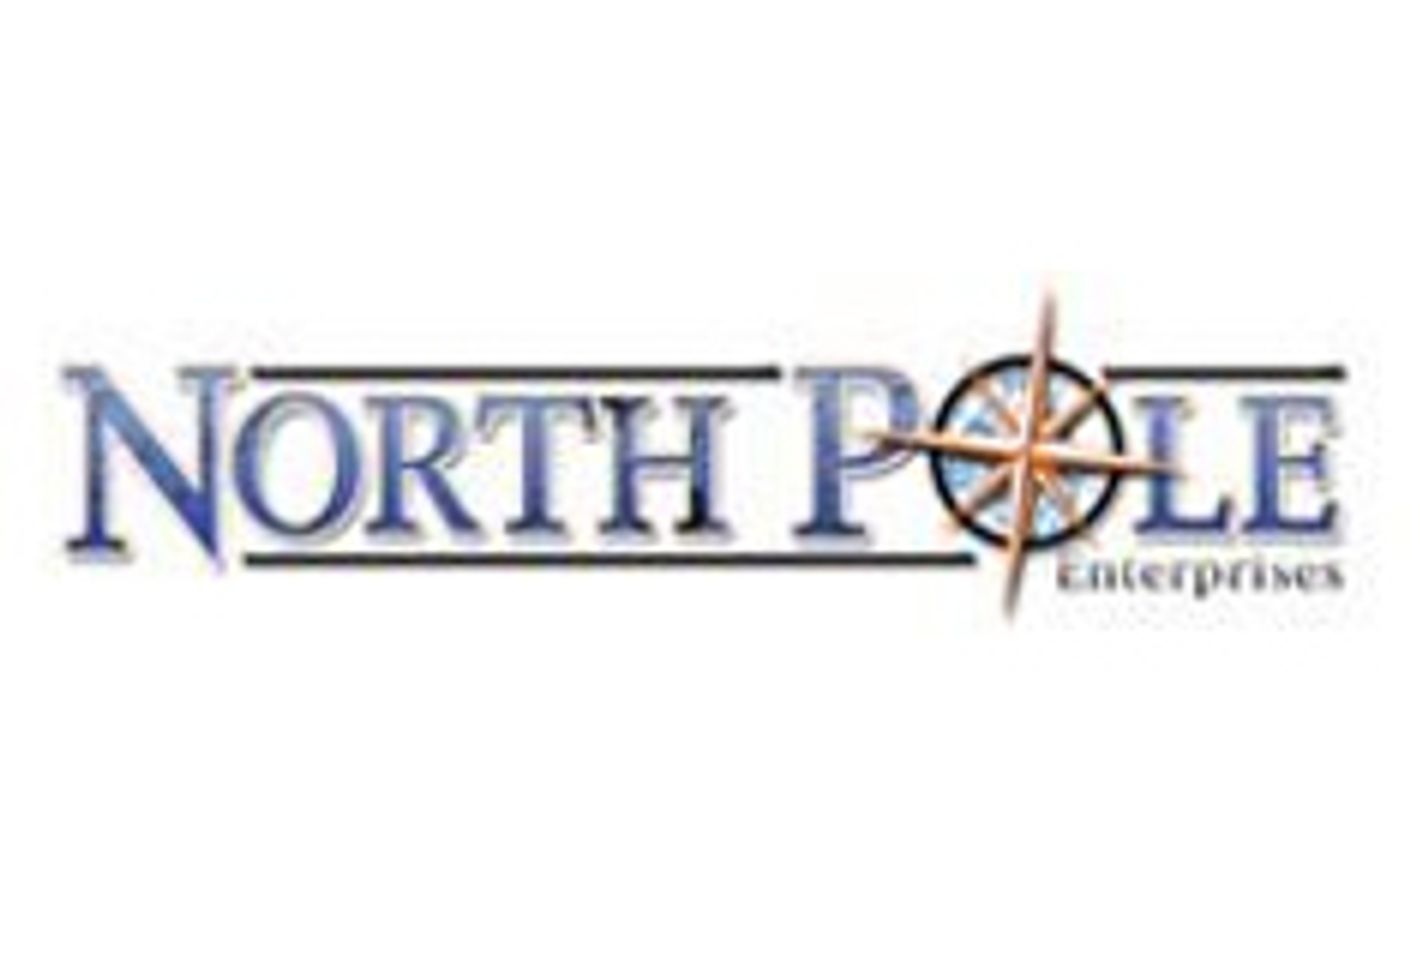 'North Pole 89' Releases on December 15